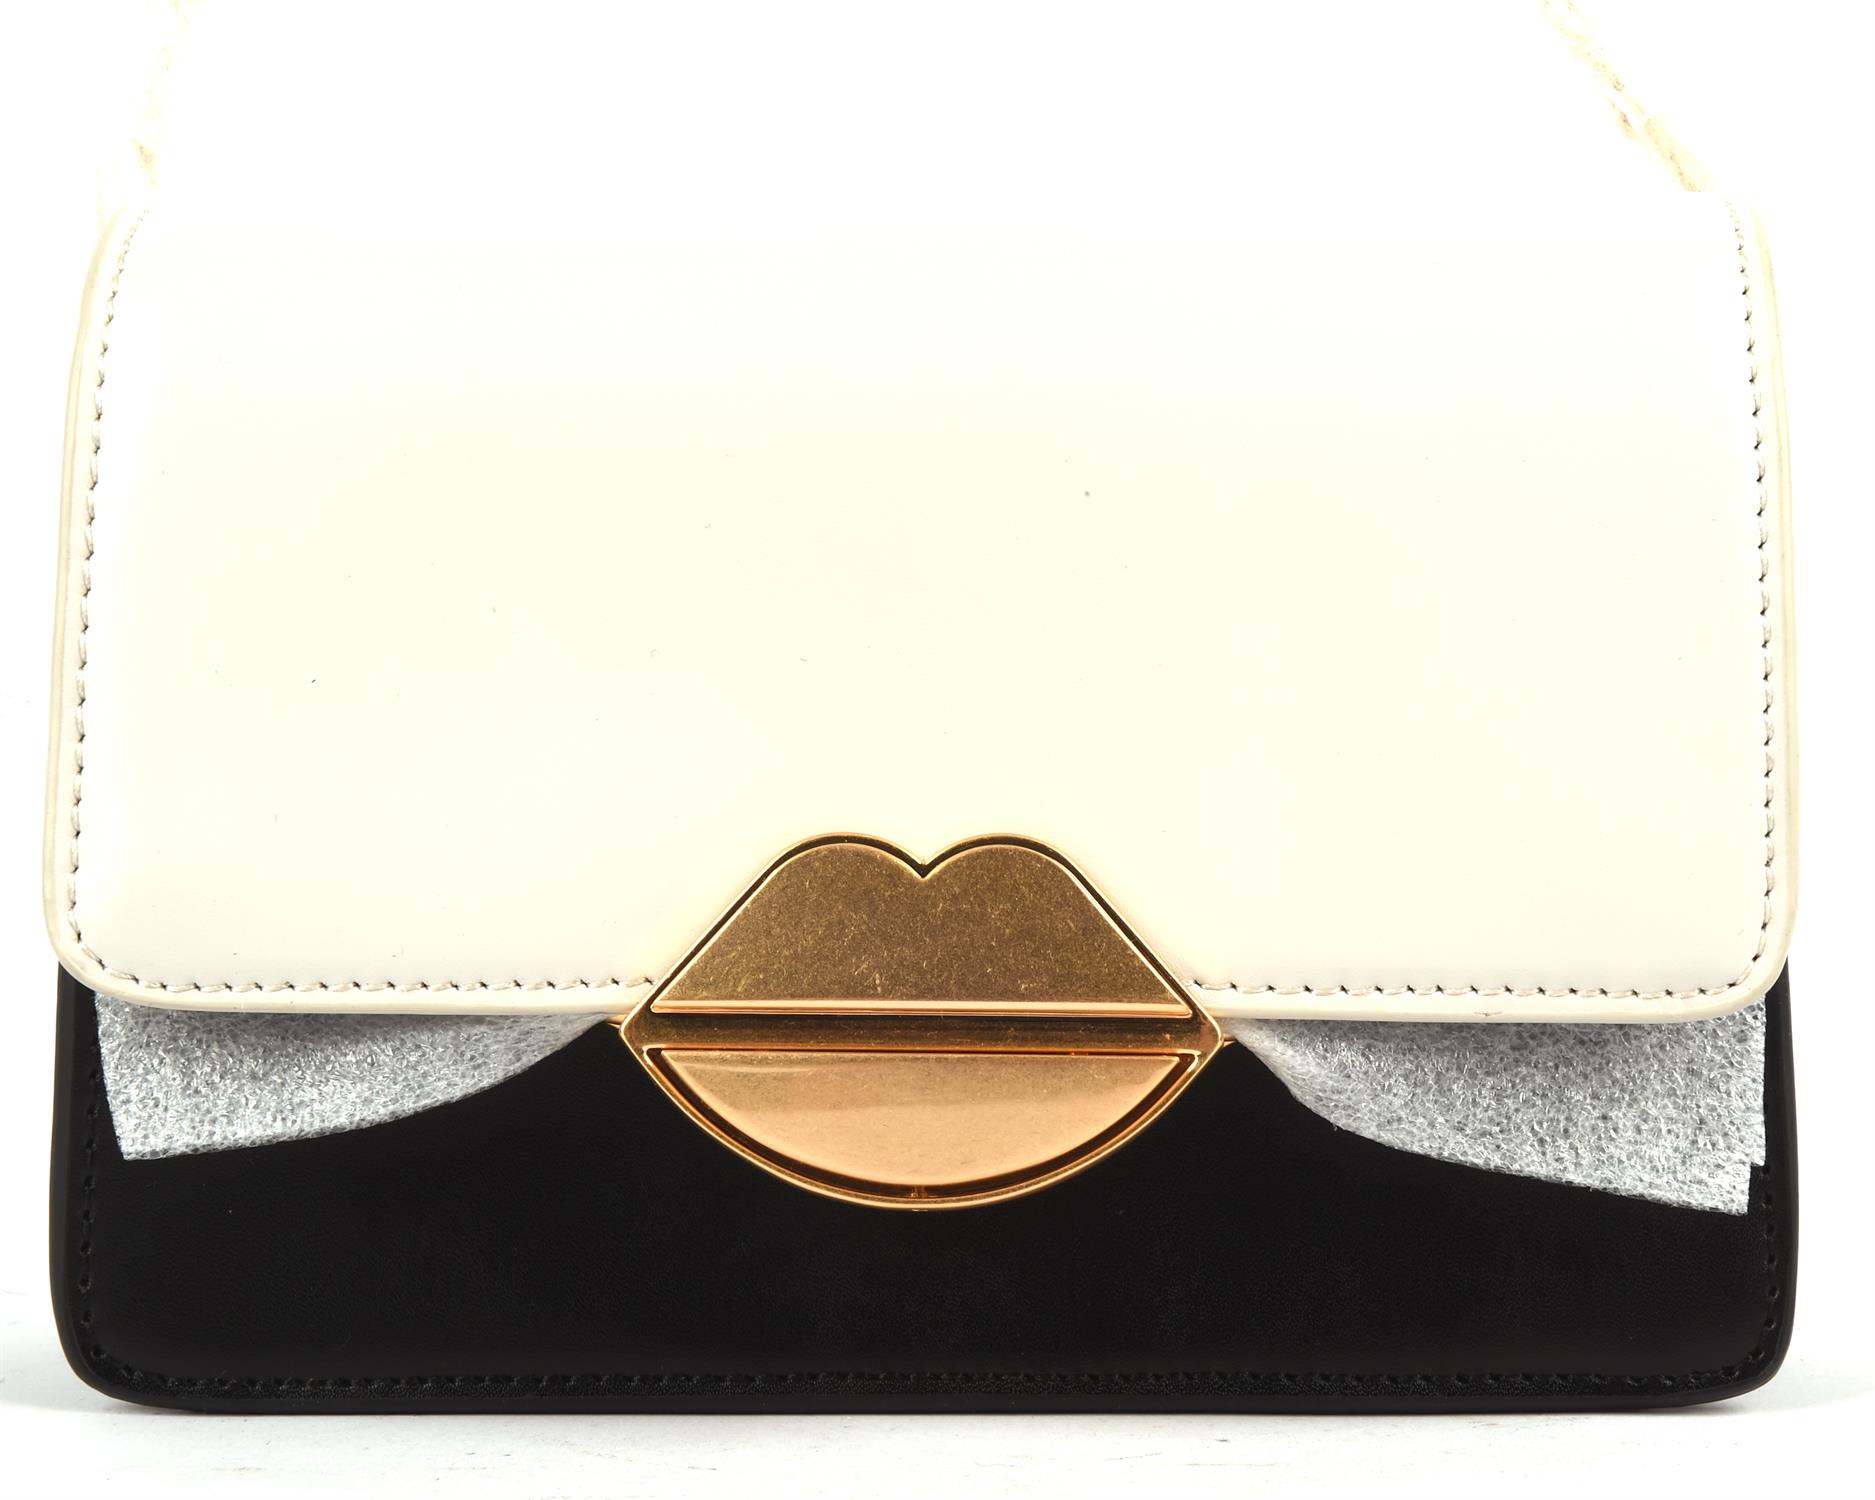 LULU GUINNESS small black and dove-grey leather small crossbody handbag with long gold chain, - Image 3 of 7